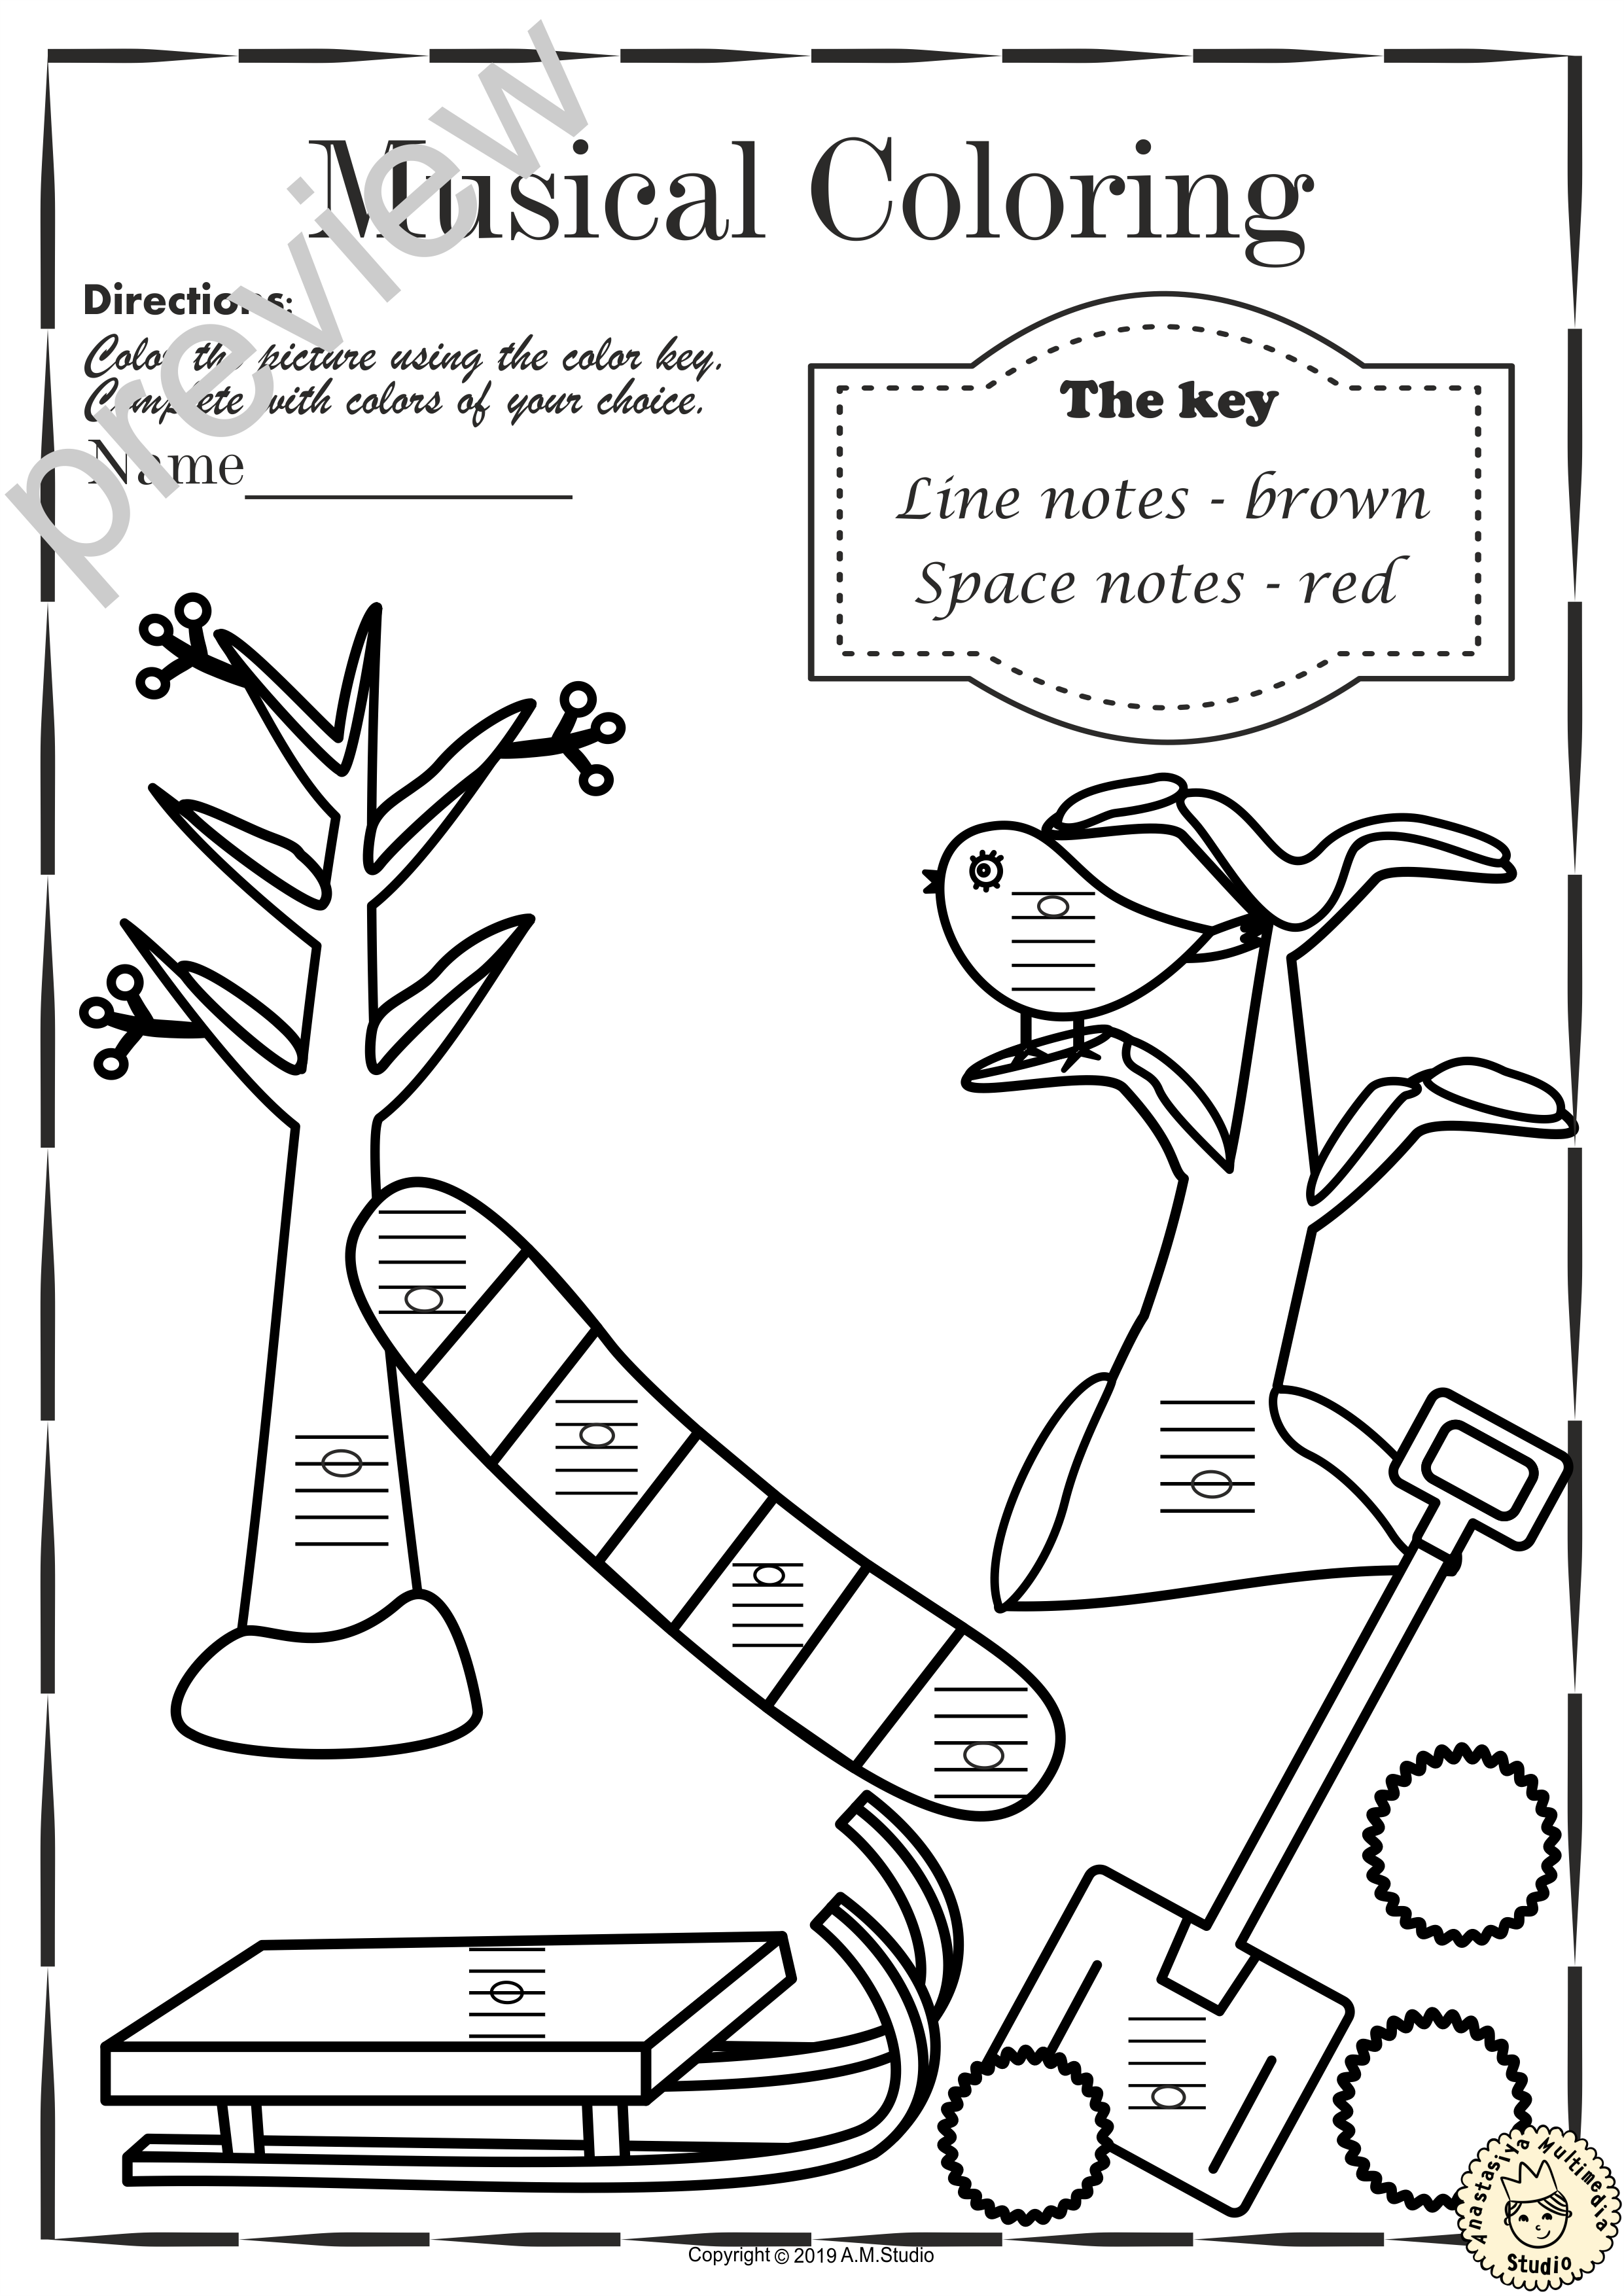 Musical Coloring Pages for Winter {Lines and Spaces} with answers (img # 1)